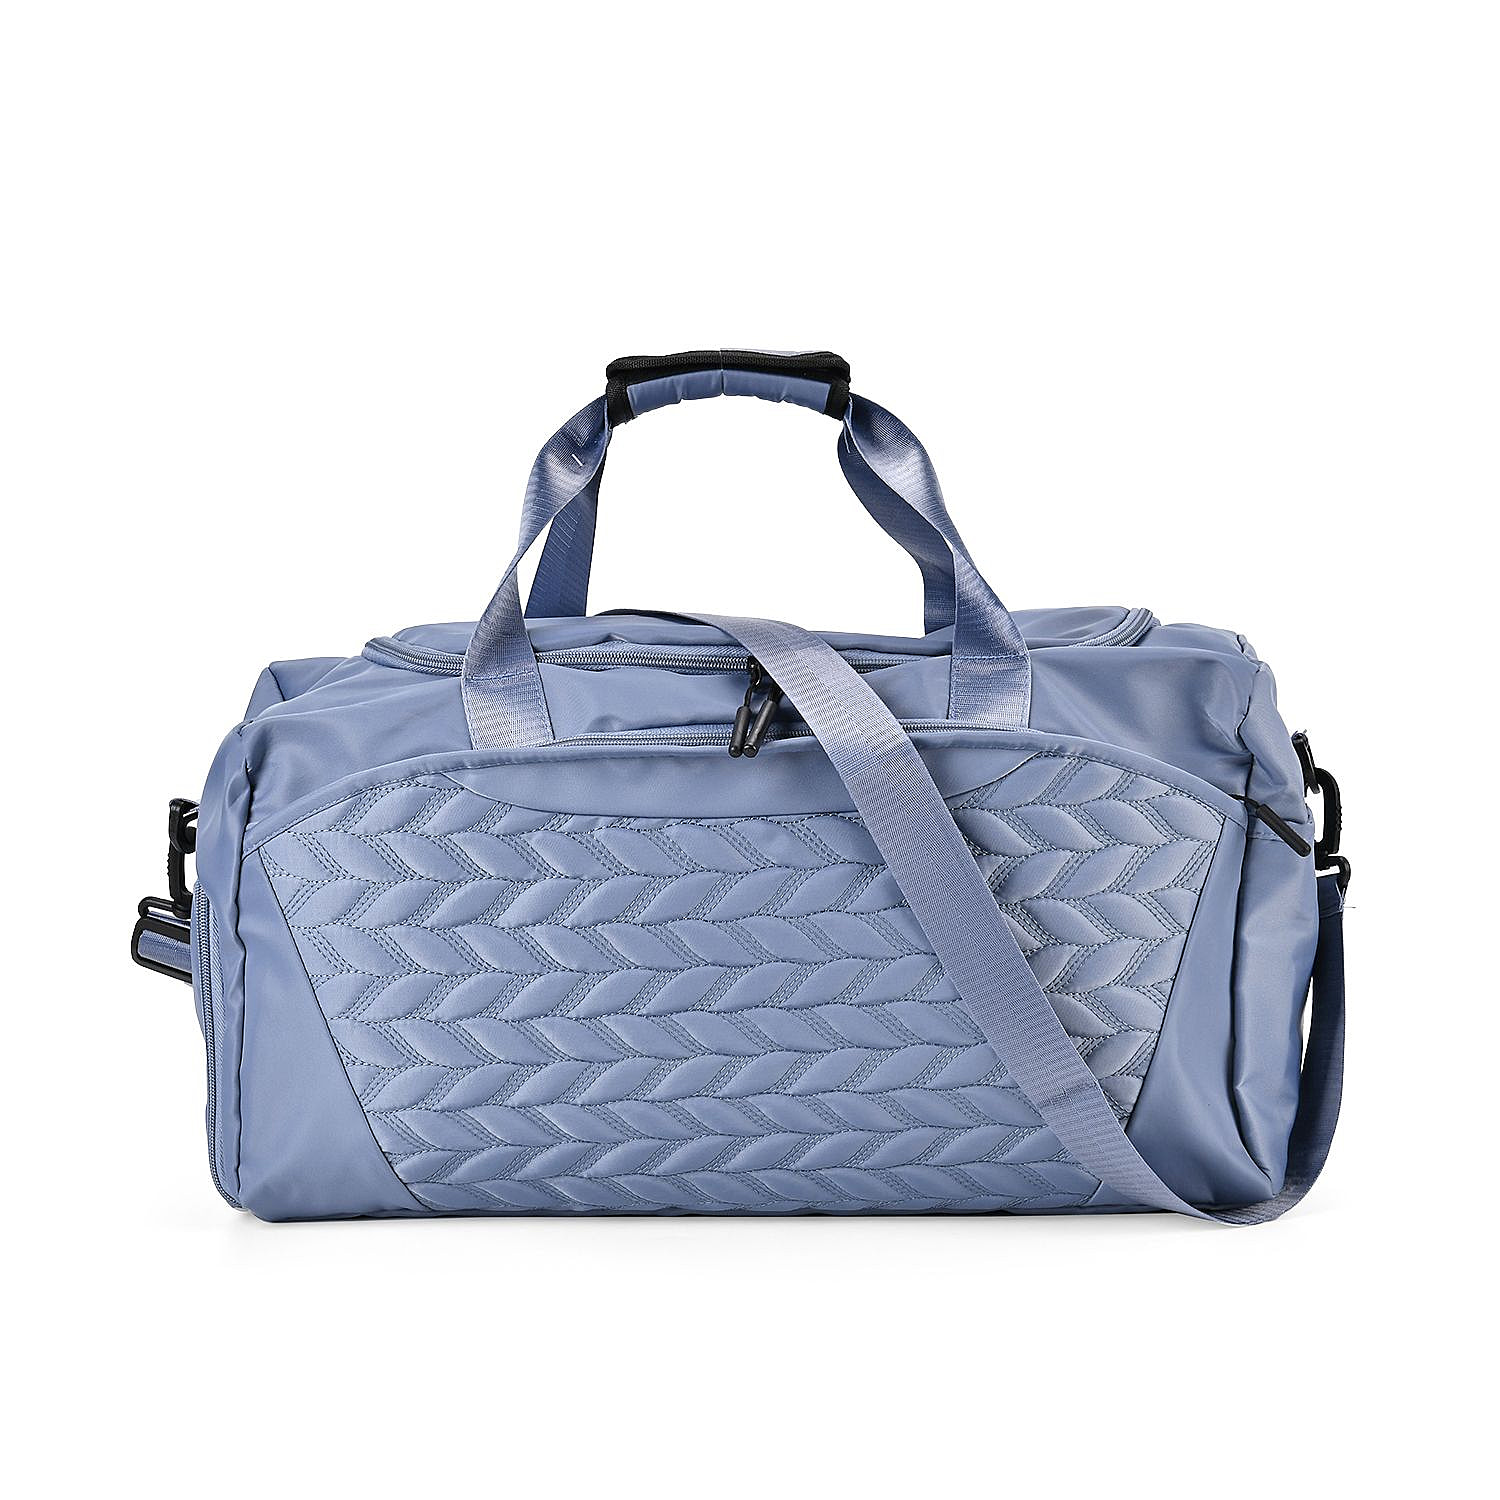 Travel Duffle Bag with Quilted Leaves Pattern - Blue